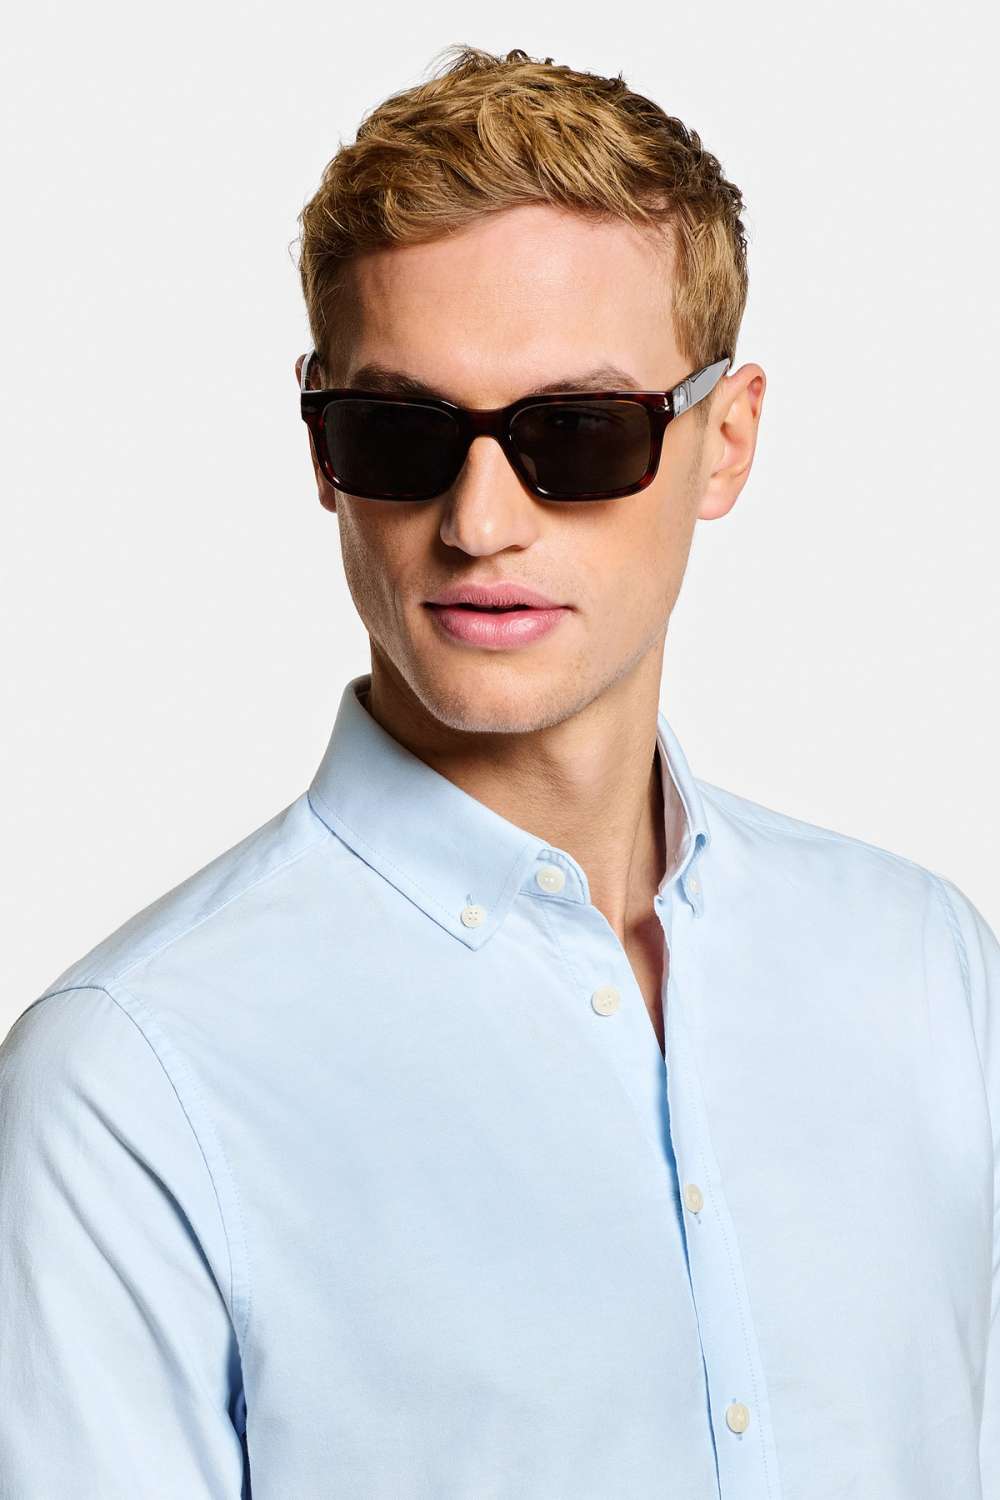 Avenues * The Oxford Shirt